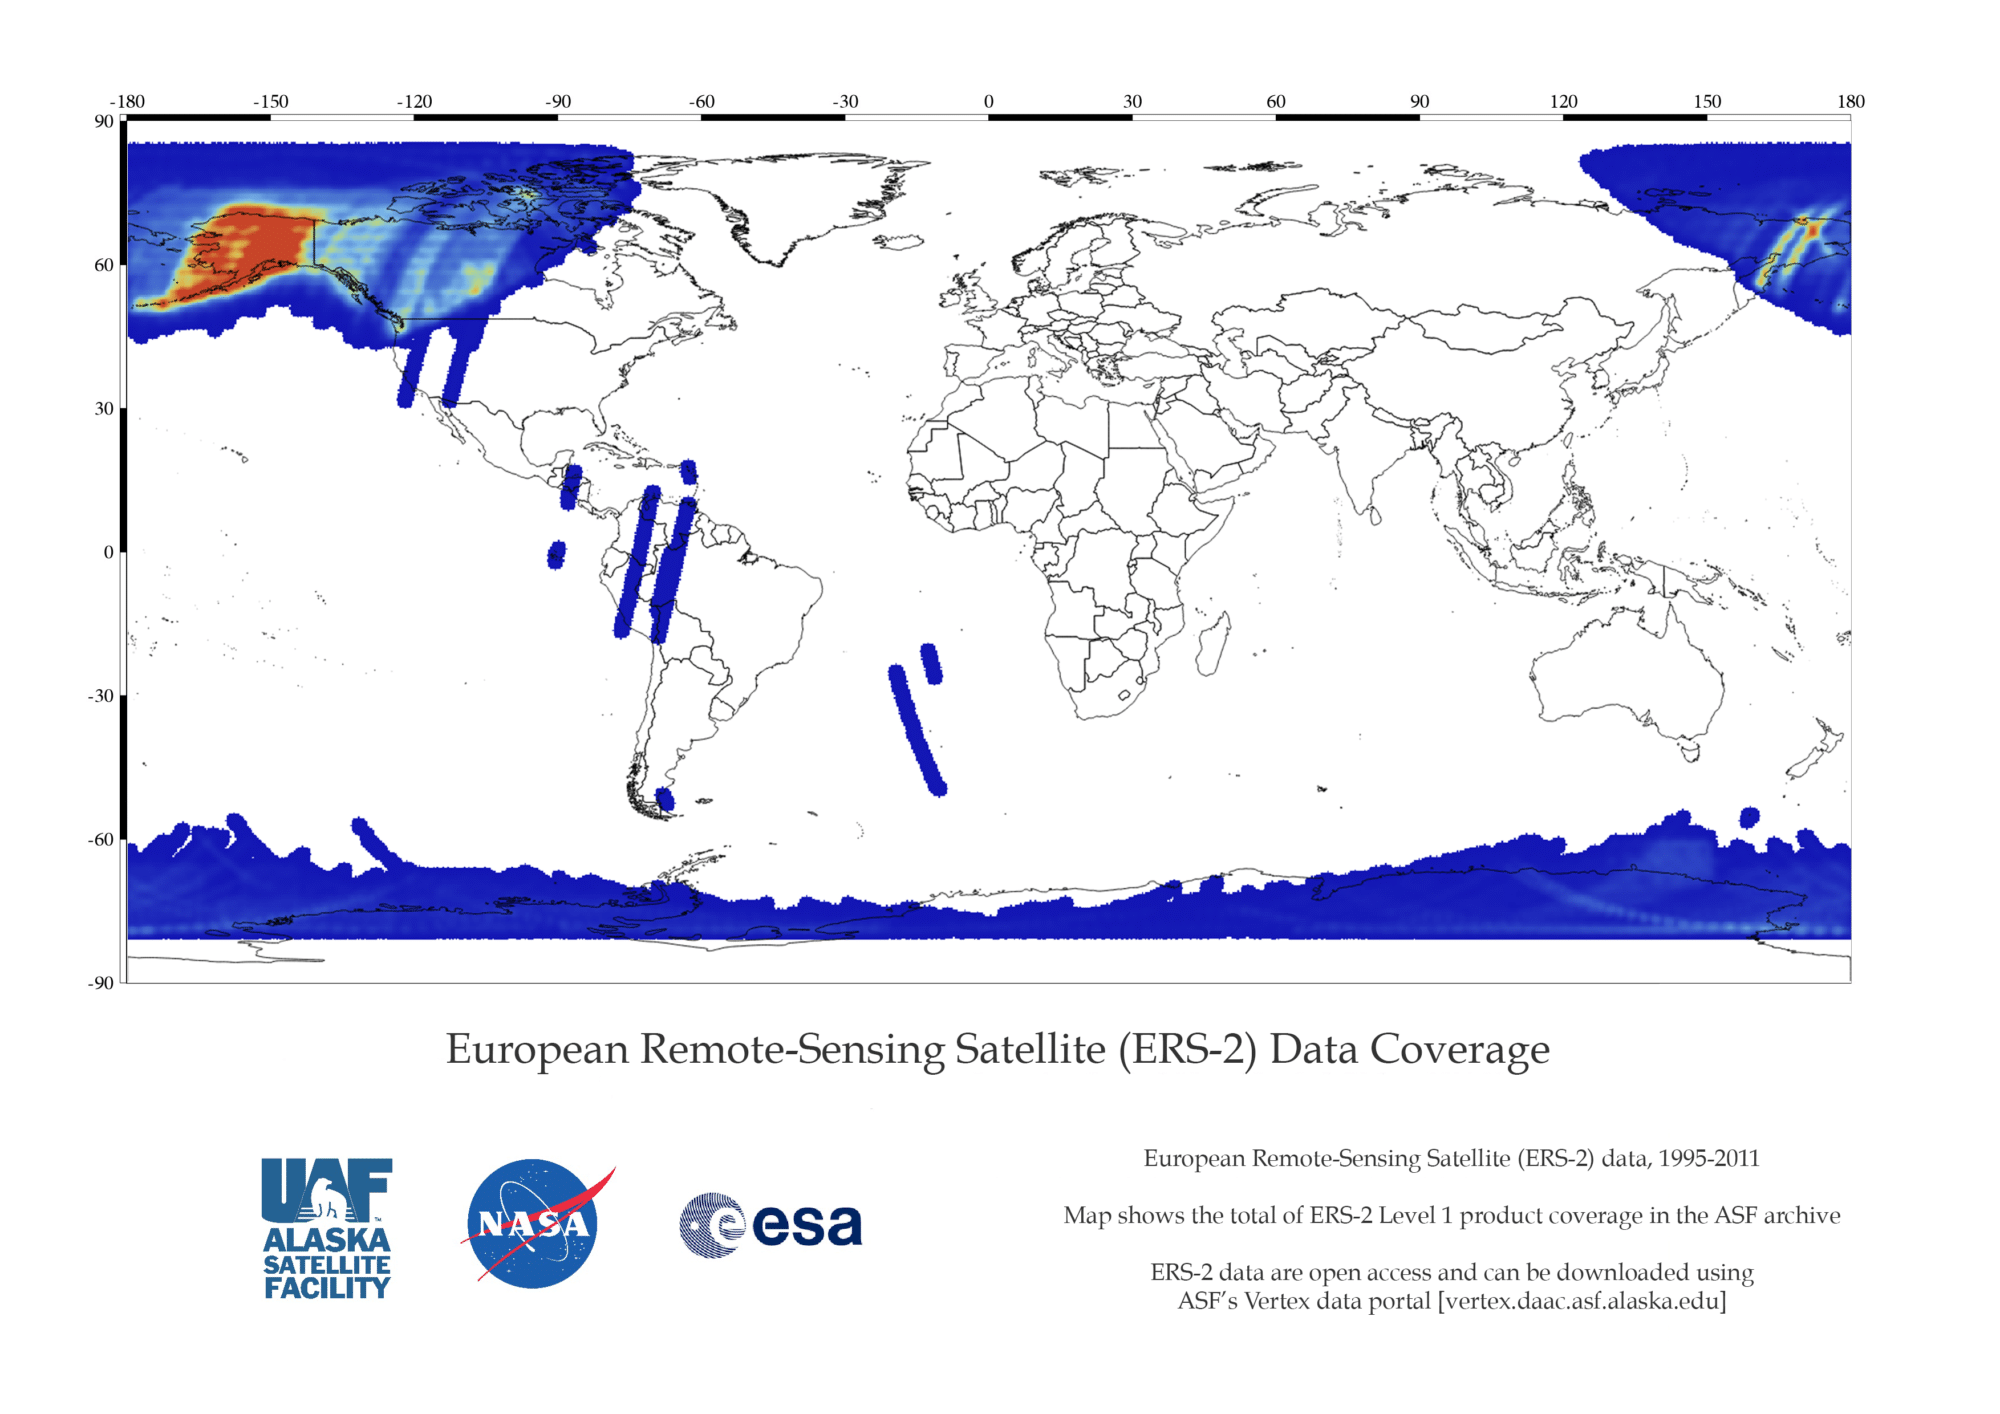 Coverage map Showing ERS-2 data